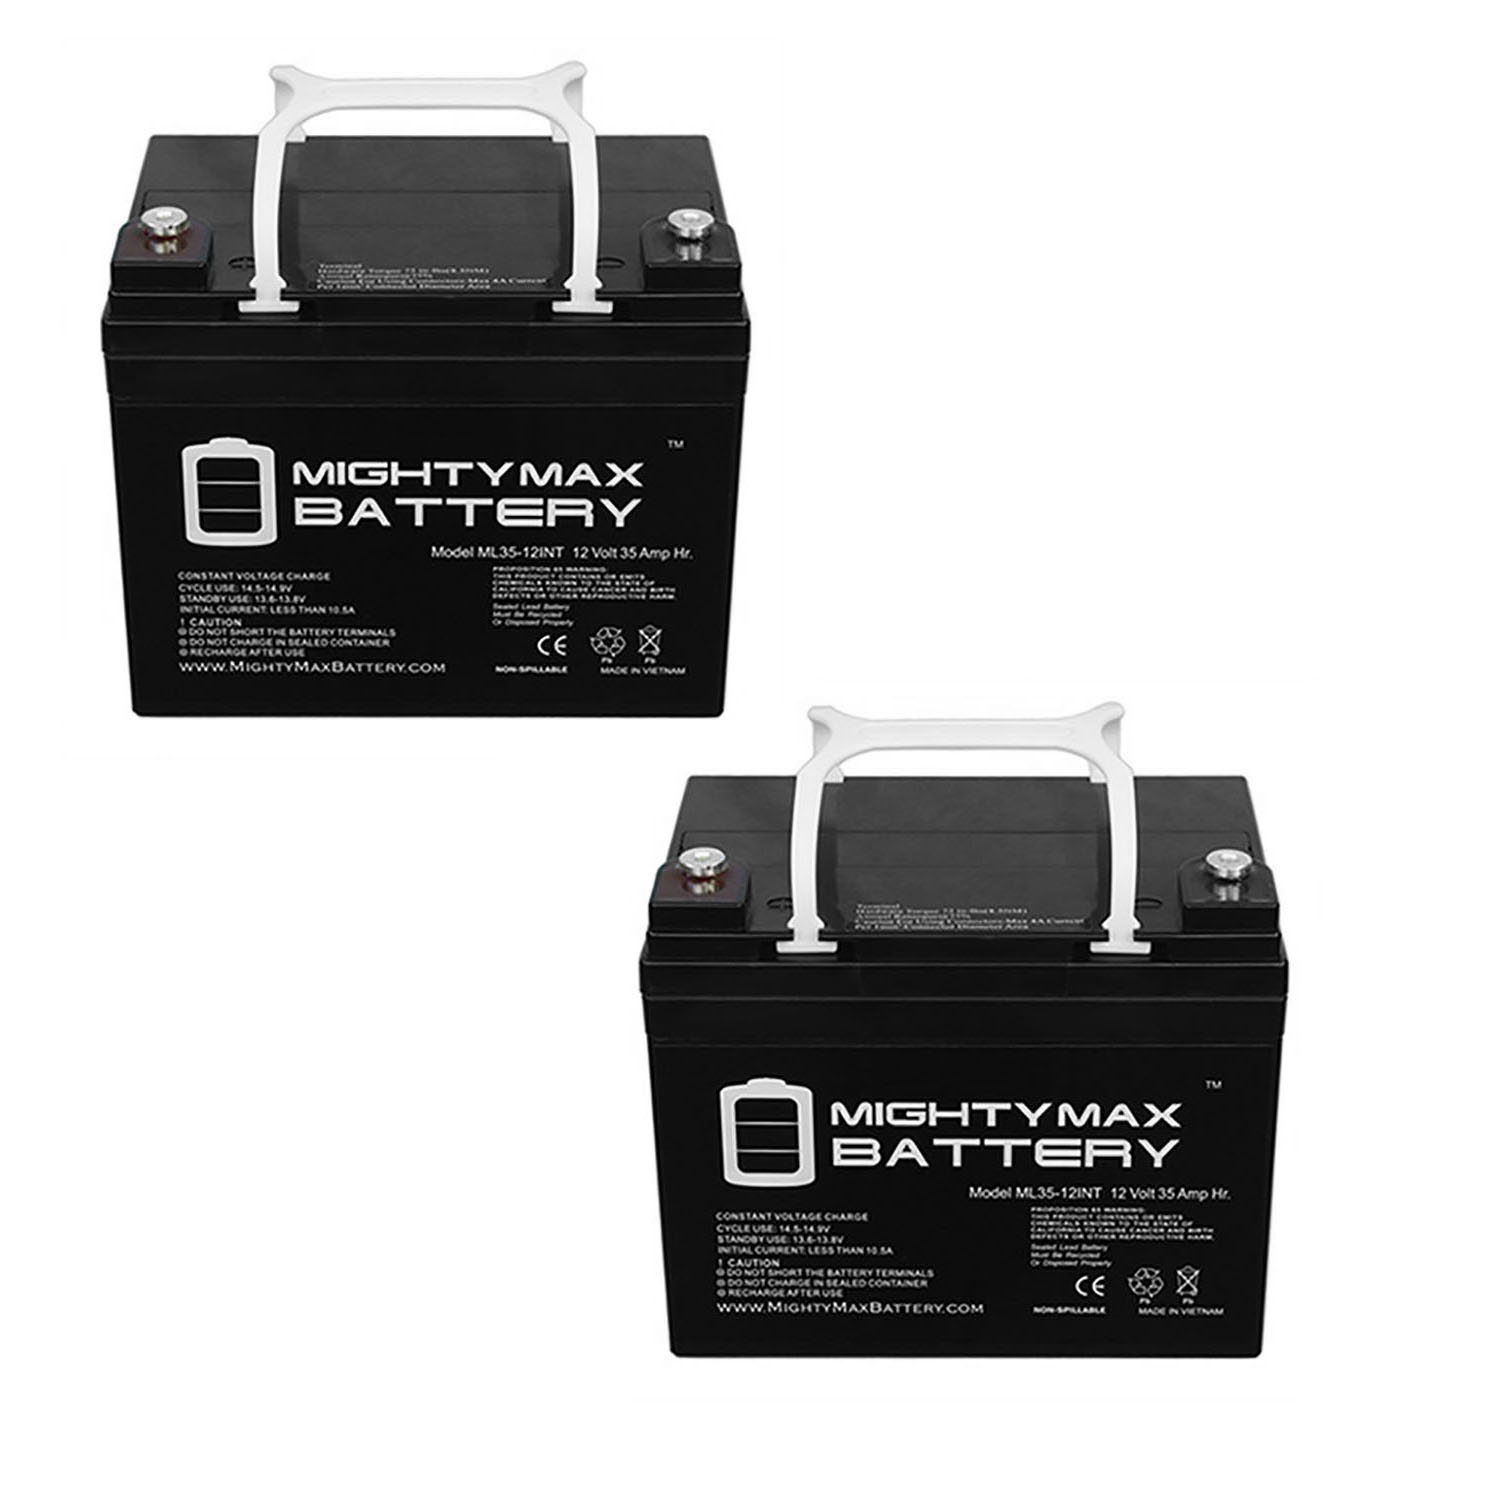 12V 35AH INT Replacement Battery for Hoveround Activa LX - 2 Pack